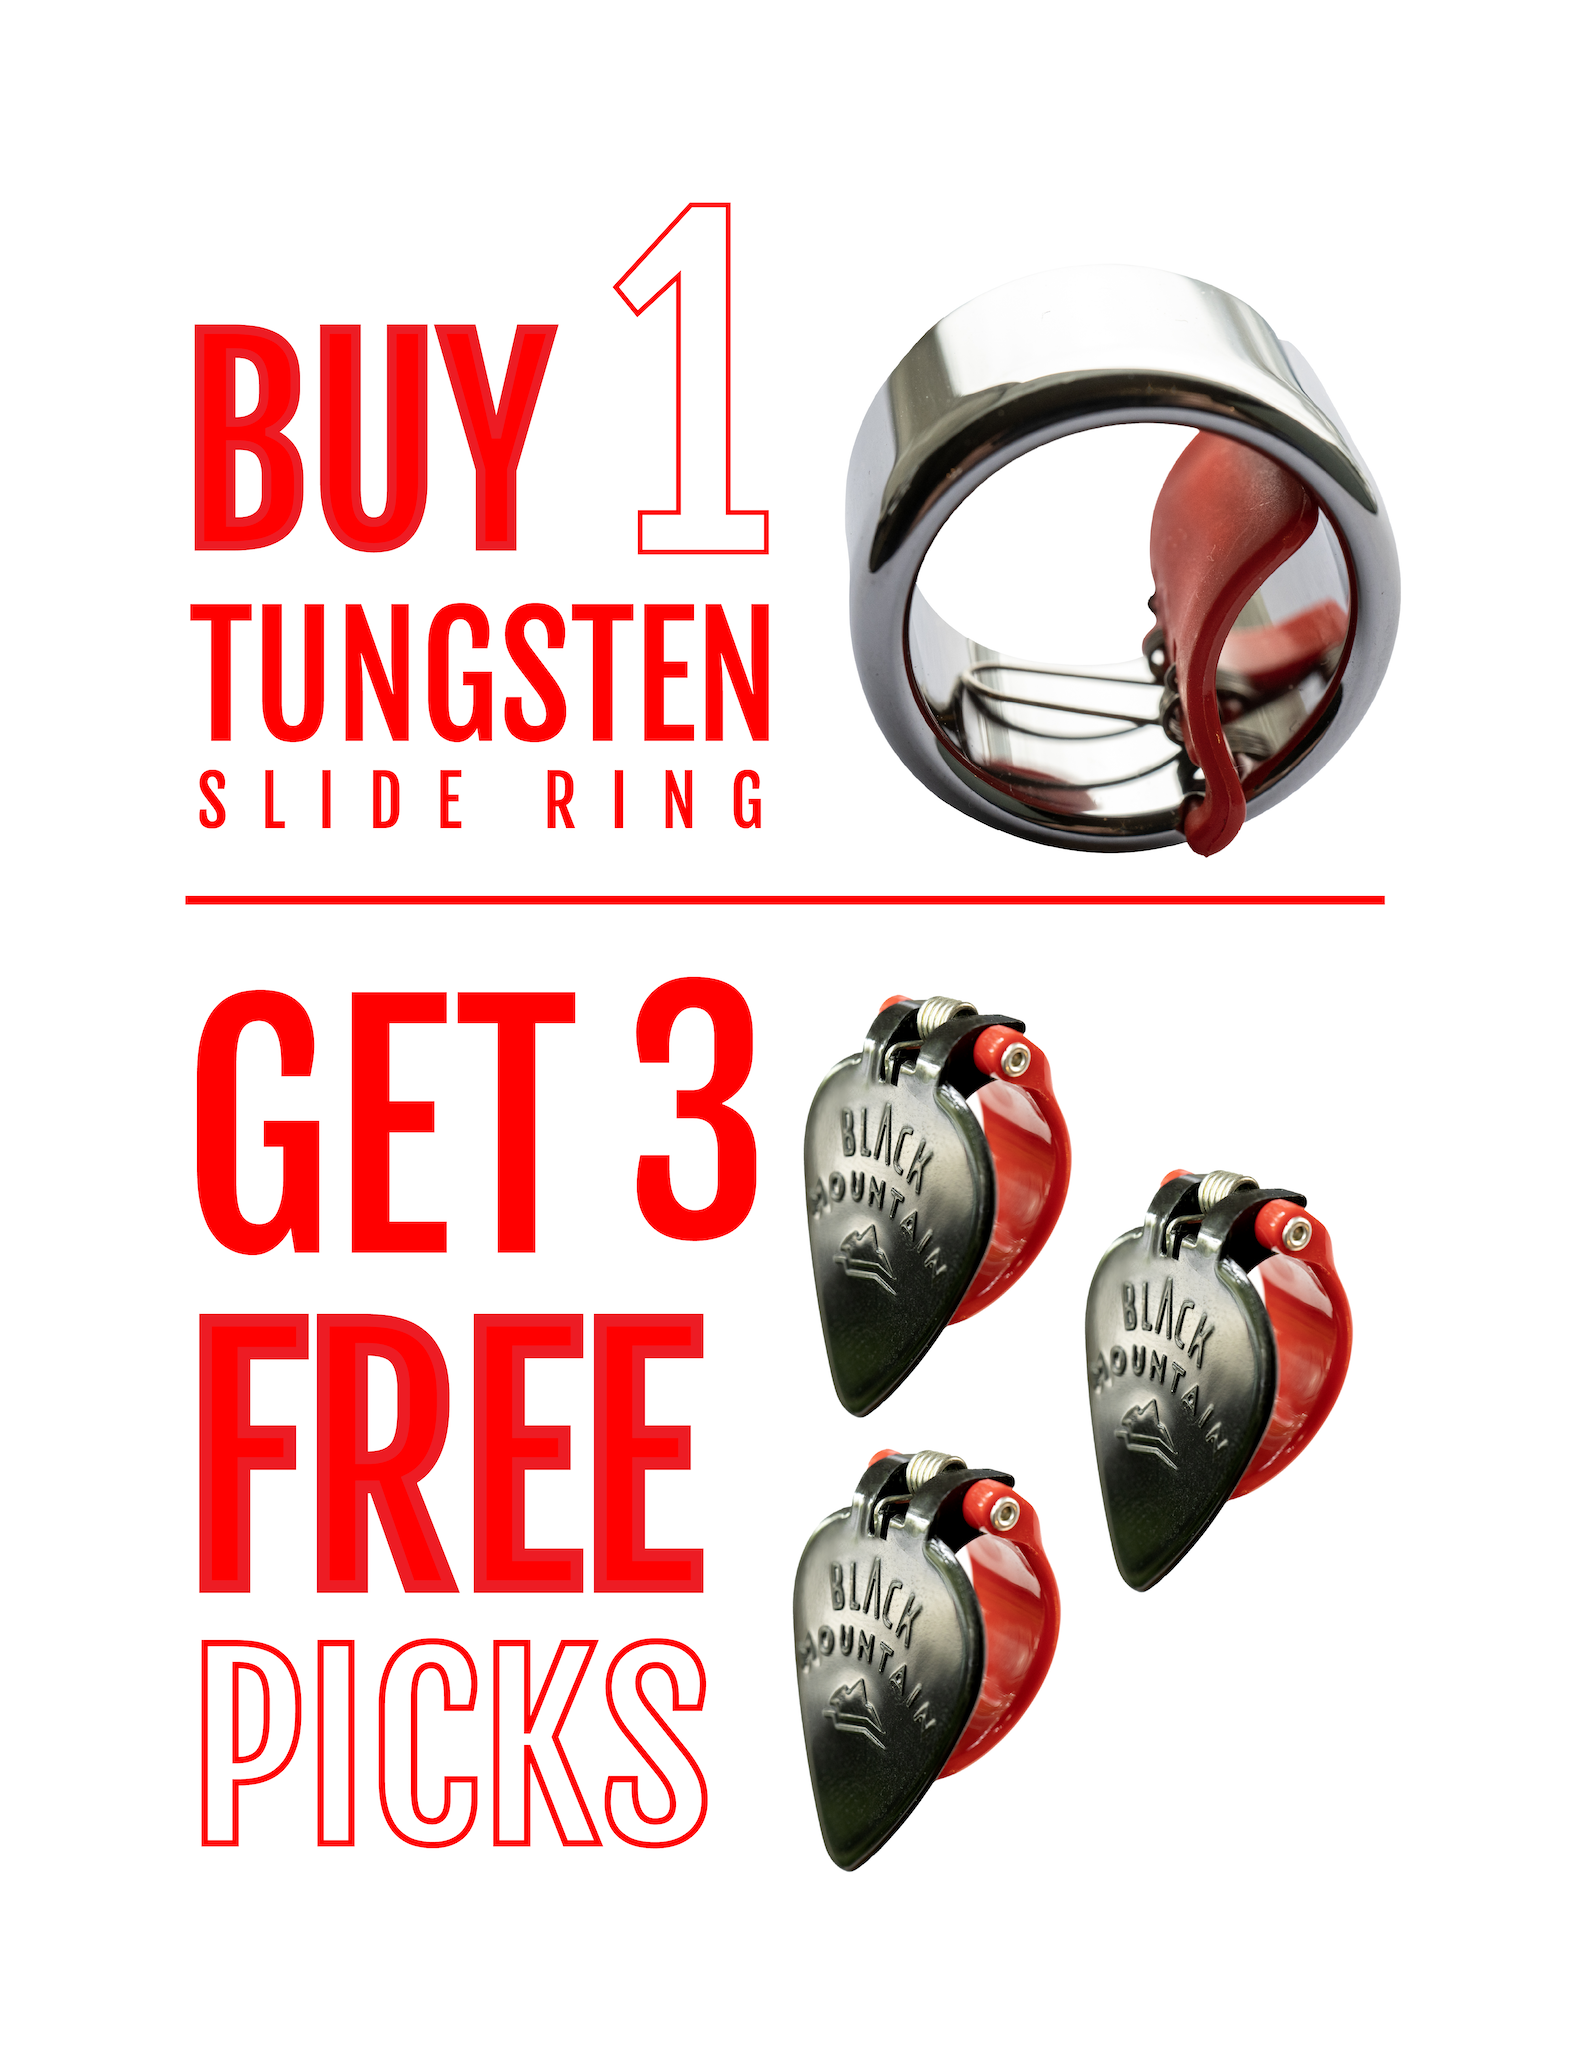 Free Pick Special: Buy 1 slide and get 3 free thumb picks